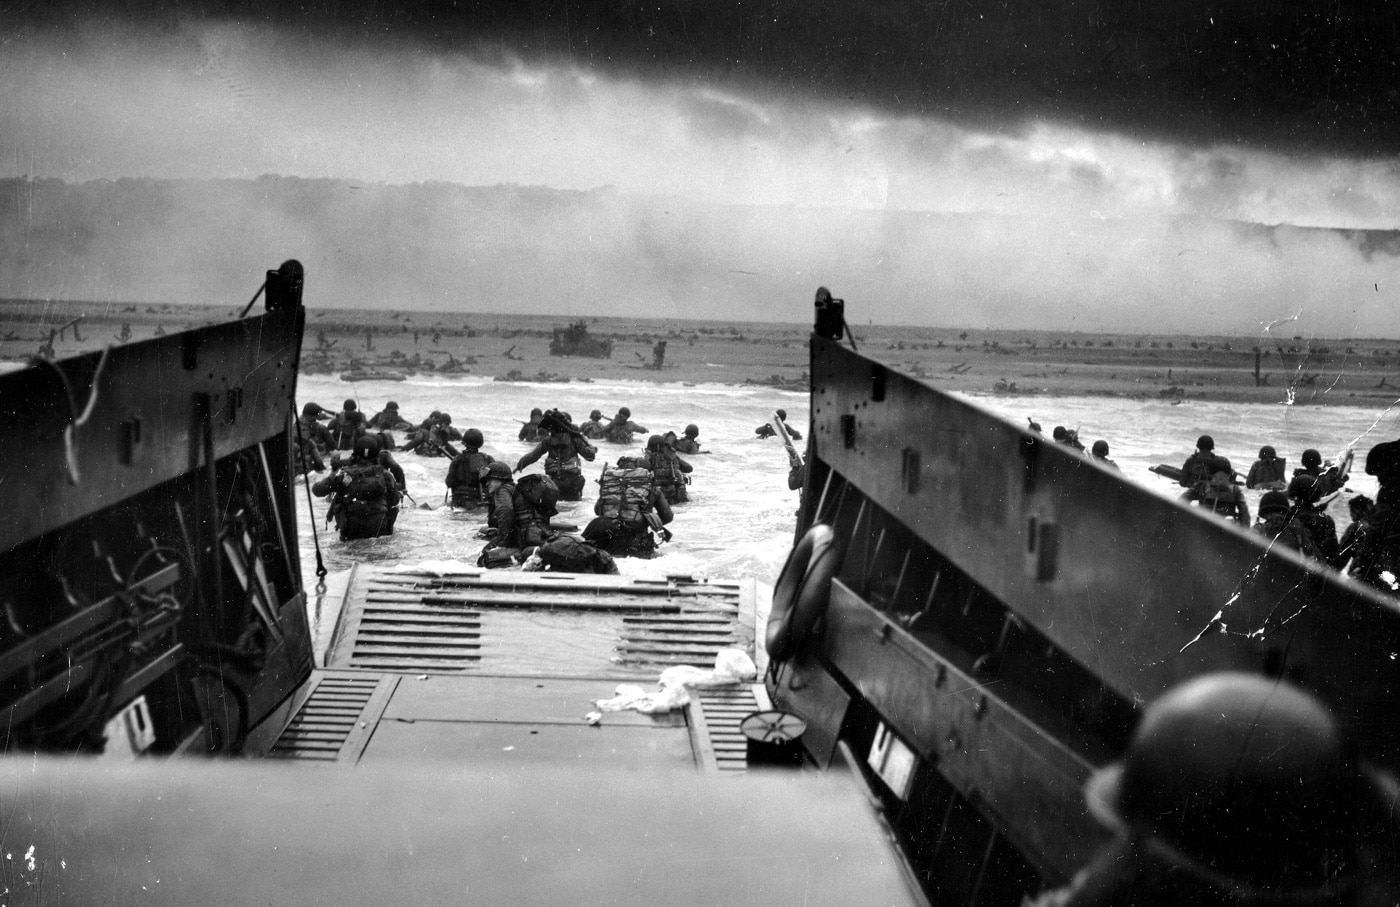 In this historic photo of Operation Neptune, we see American combat troops landing to attack the Atlantic Wall in WWII. It is one of the few photos from the early minutes of the invasion that survived.